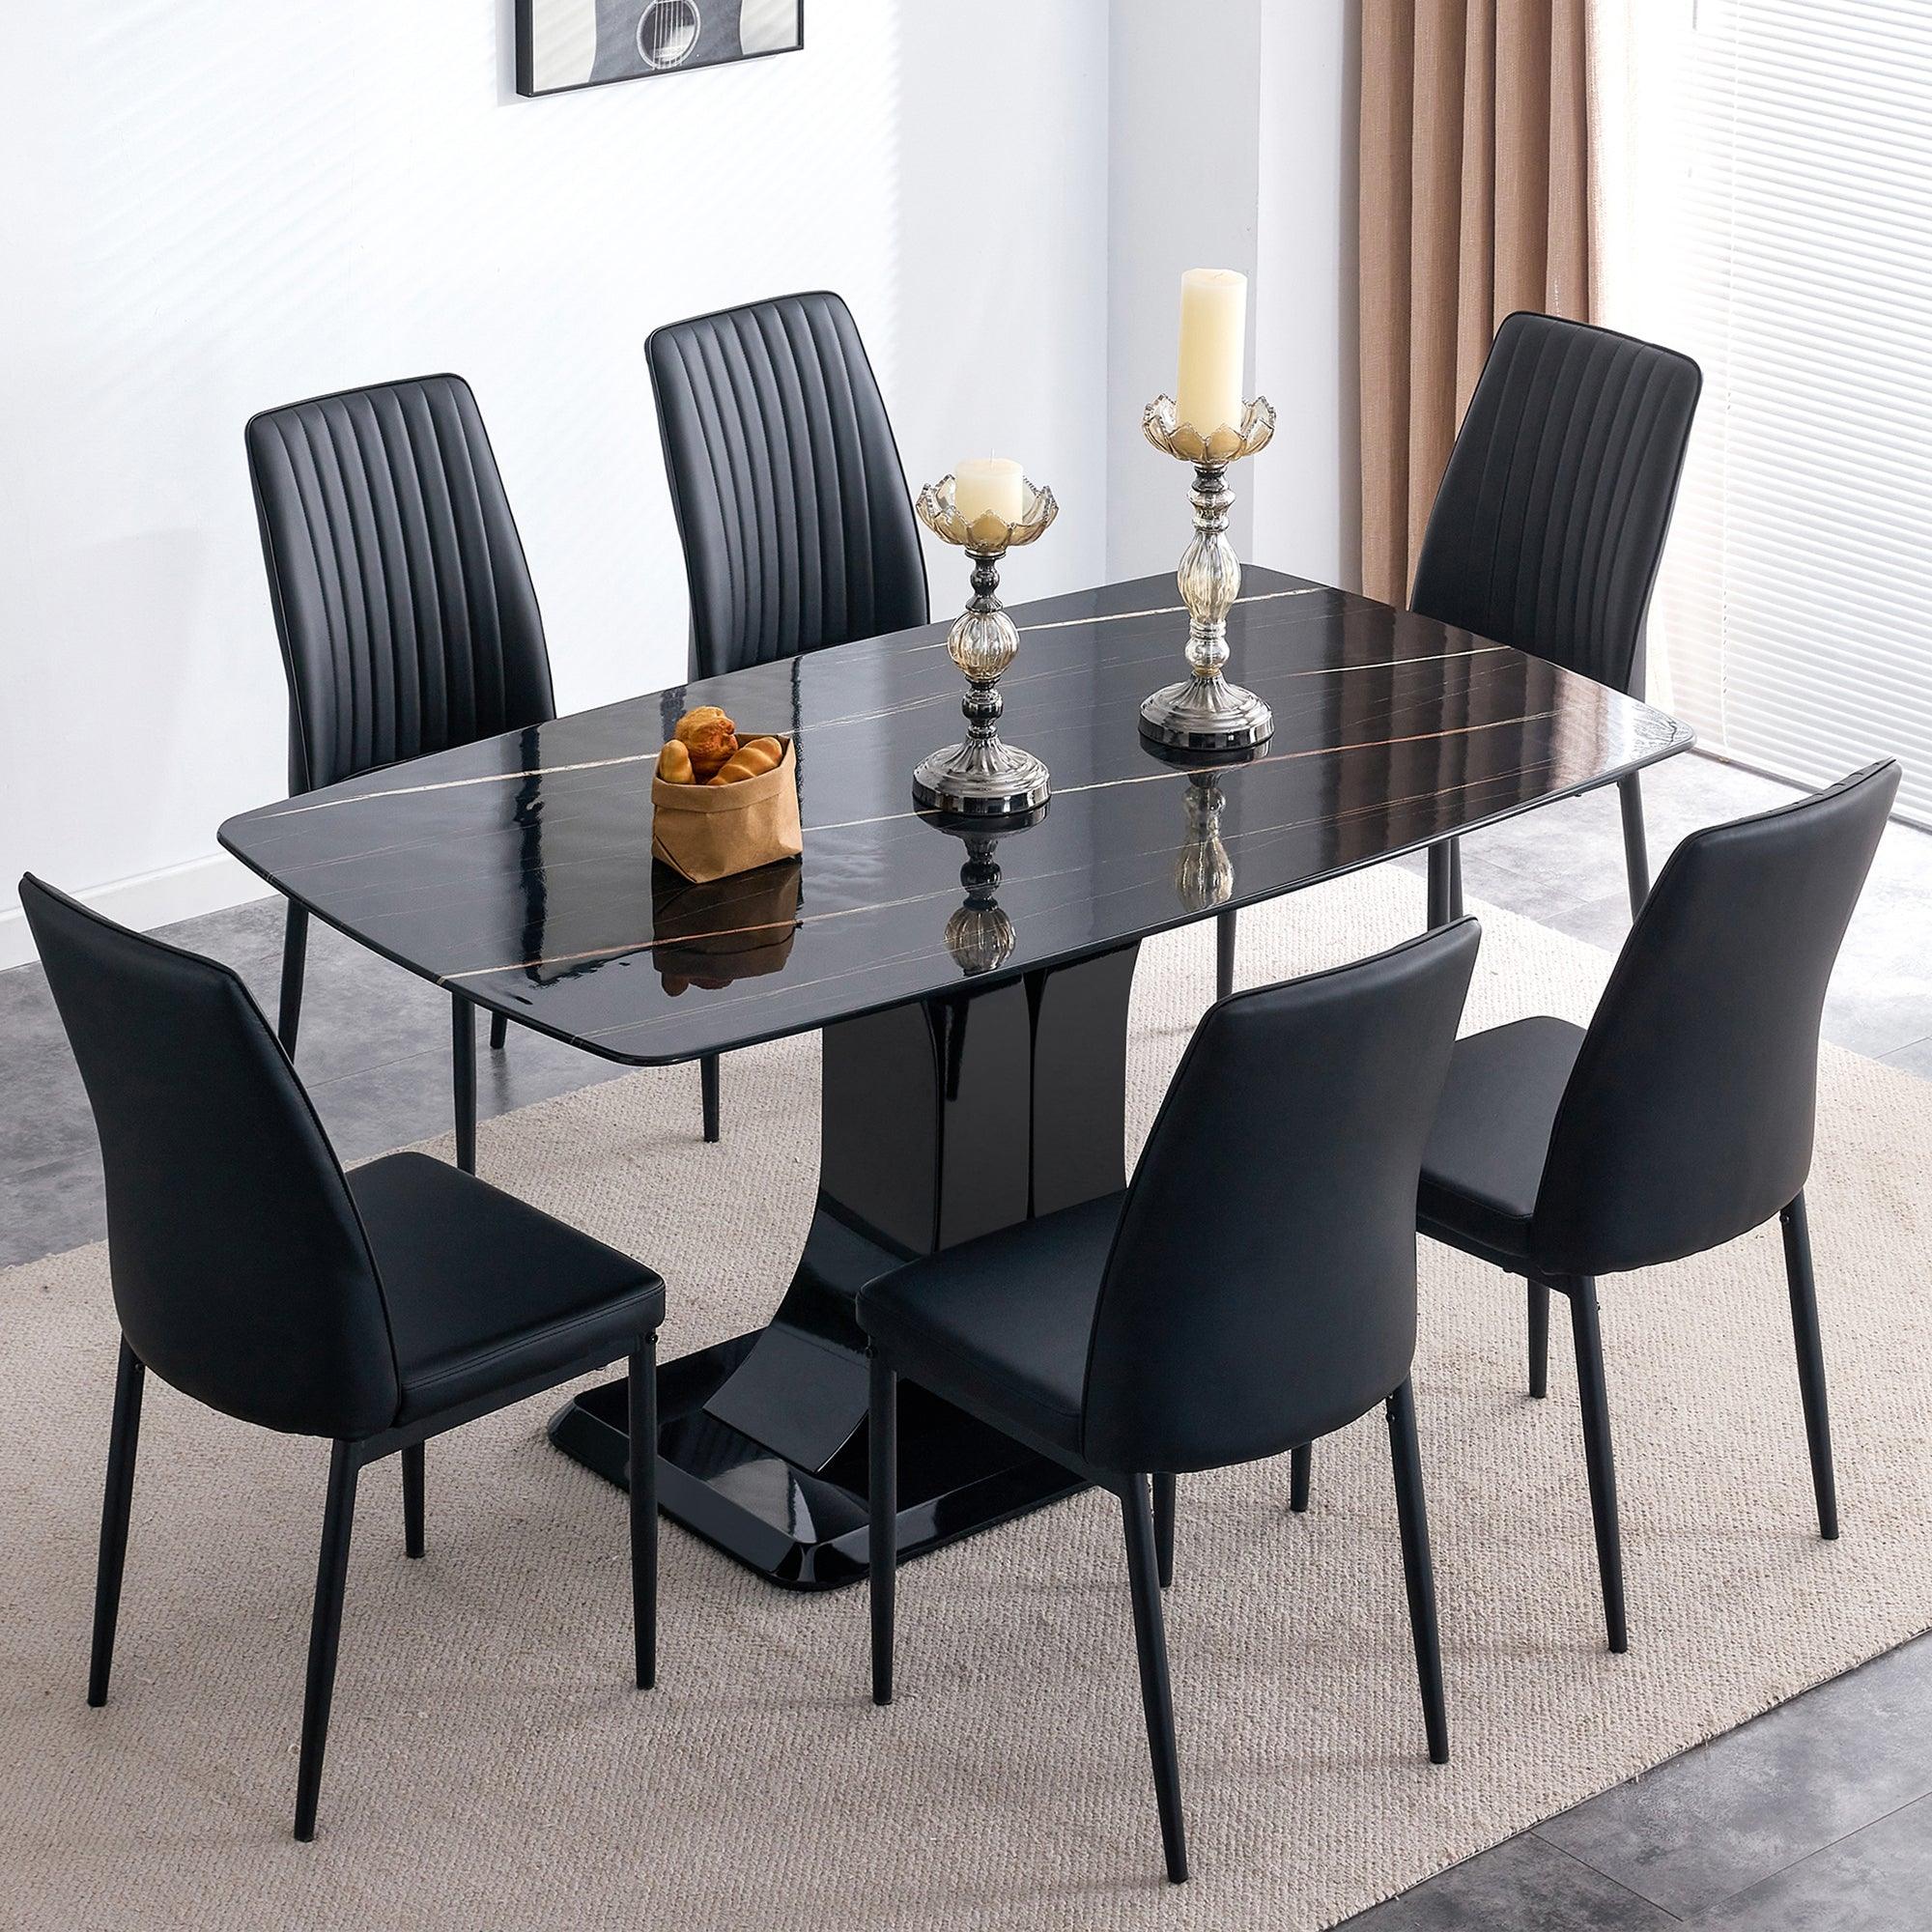 🆓🚛 7 Pcs Dining Set, Modern Black Faux Marble Rectangular Table With Convertible Base, 6 Dining Chairs, Black